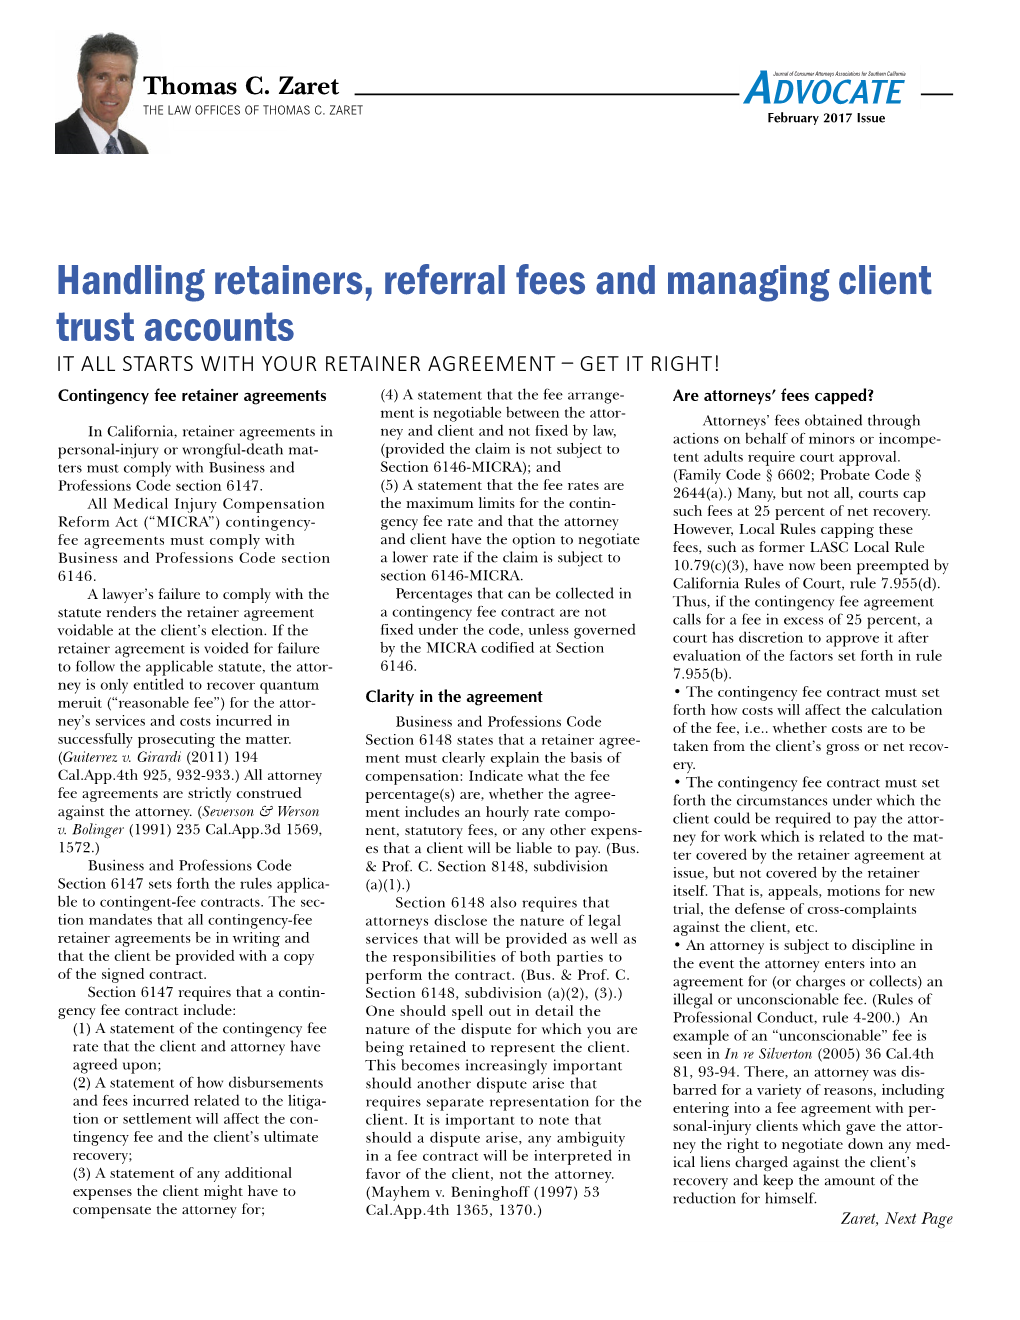 Handling Retainers, Referral Fees and Managing Client Trust Accounts